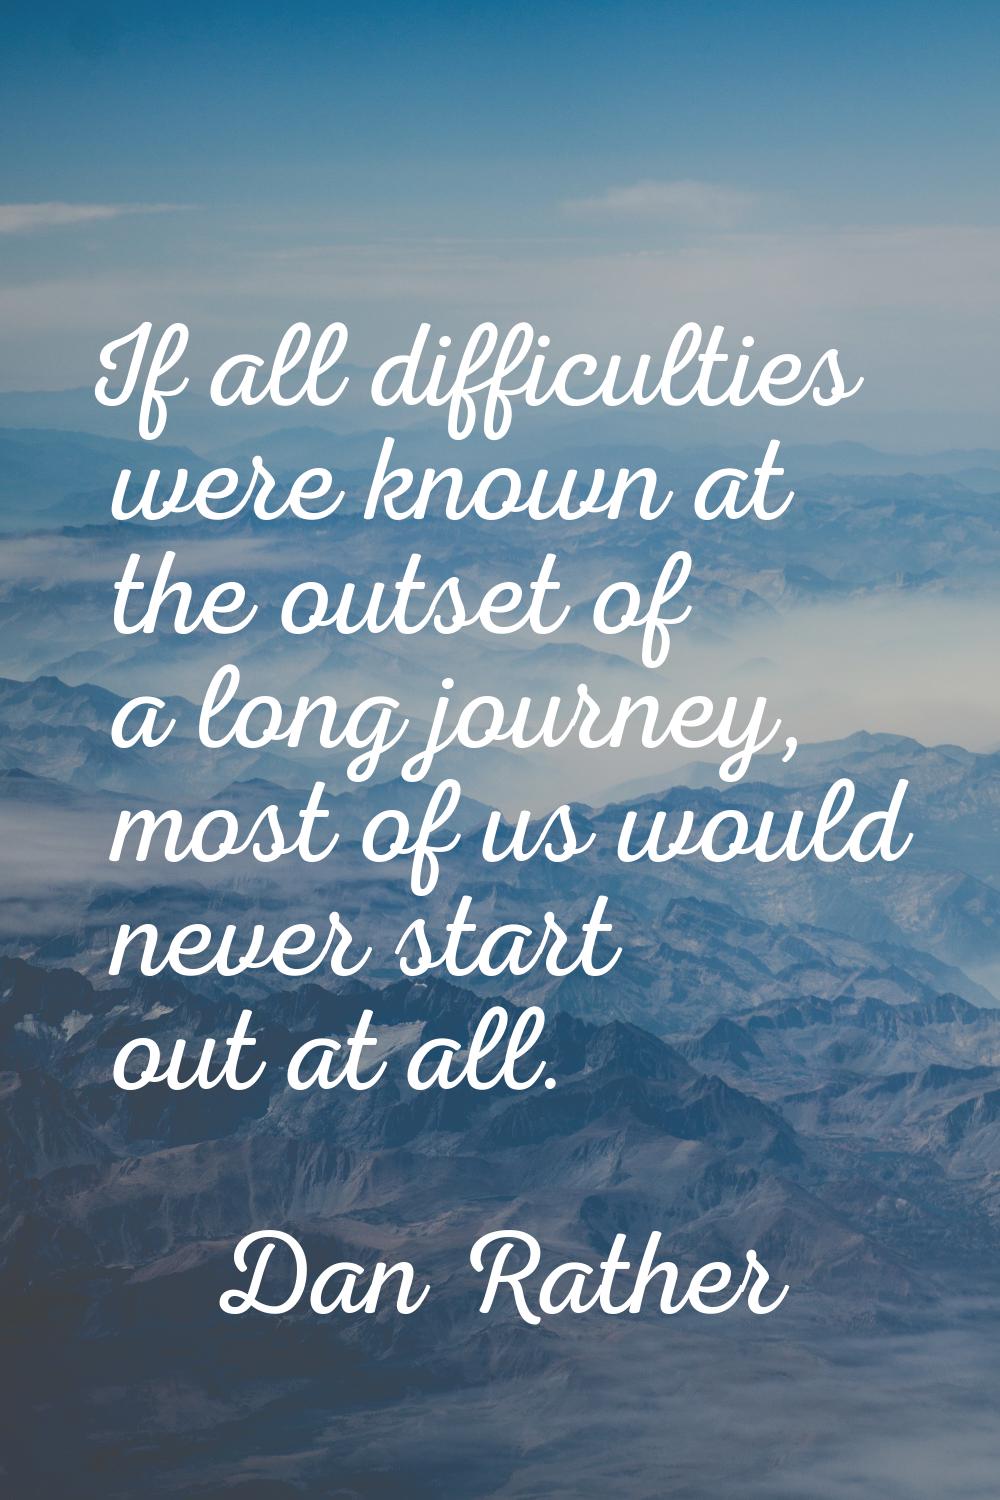 If all difficulties were known at the outset of a long journey, most of us would never start out at